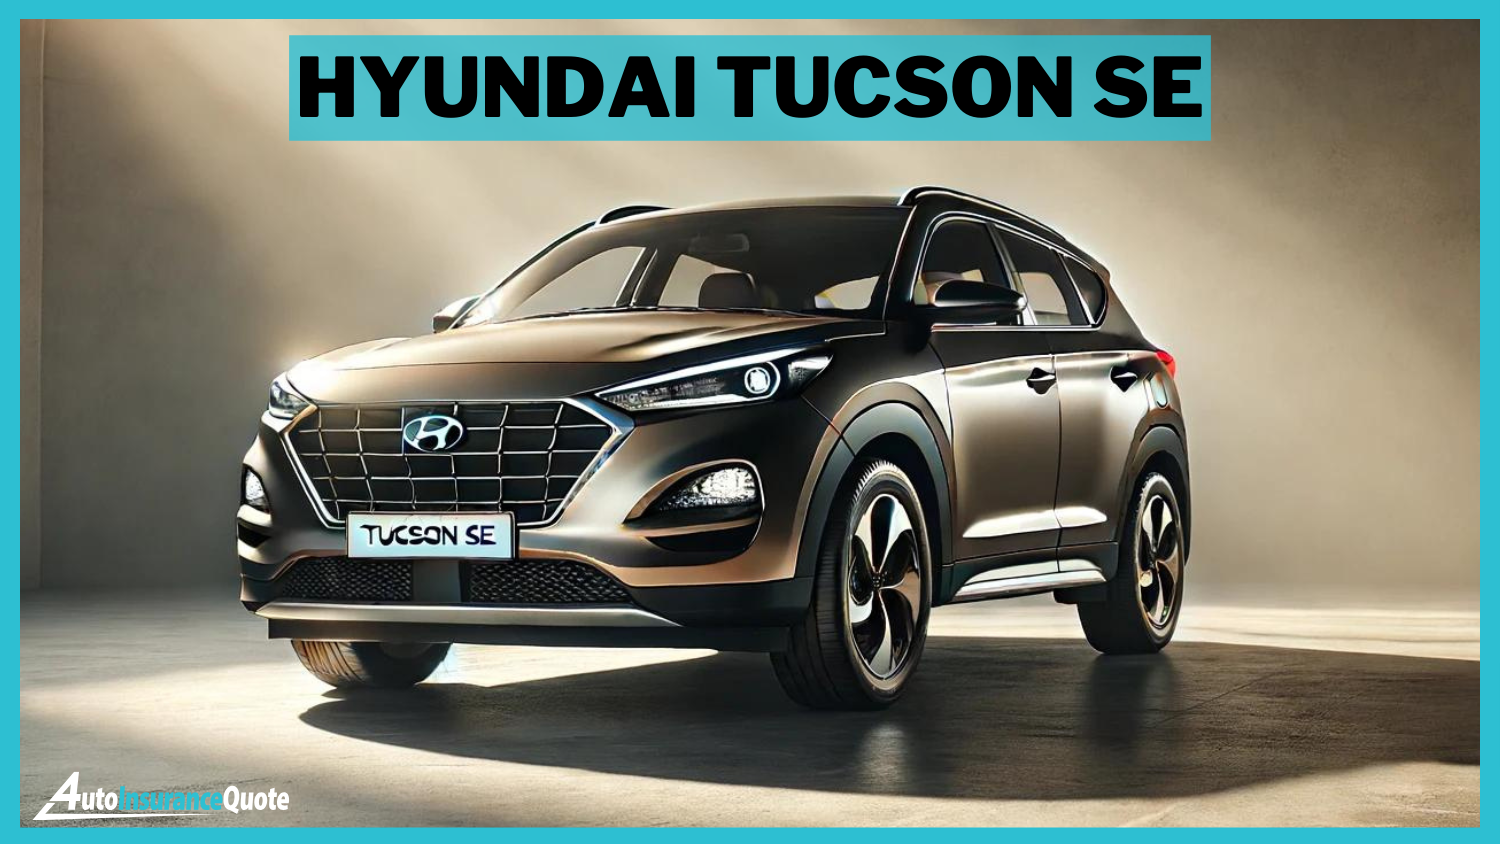 Hyundai Tucson SE: Cheapest Cars for 17-Year-Olds to Insure